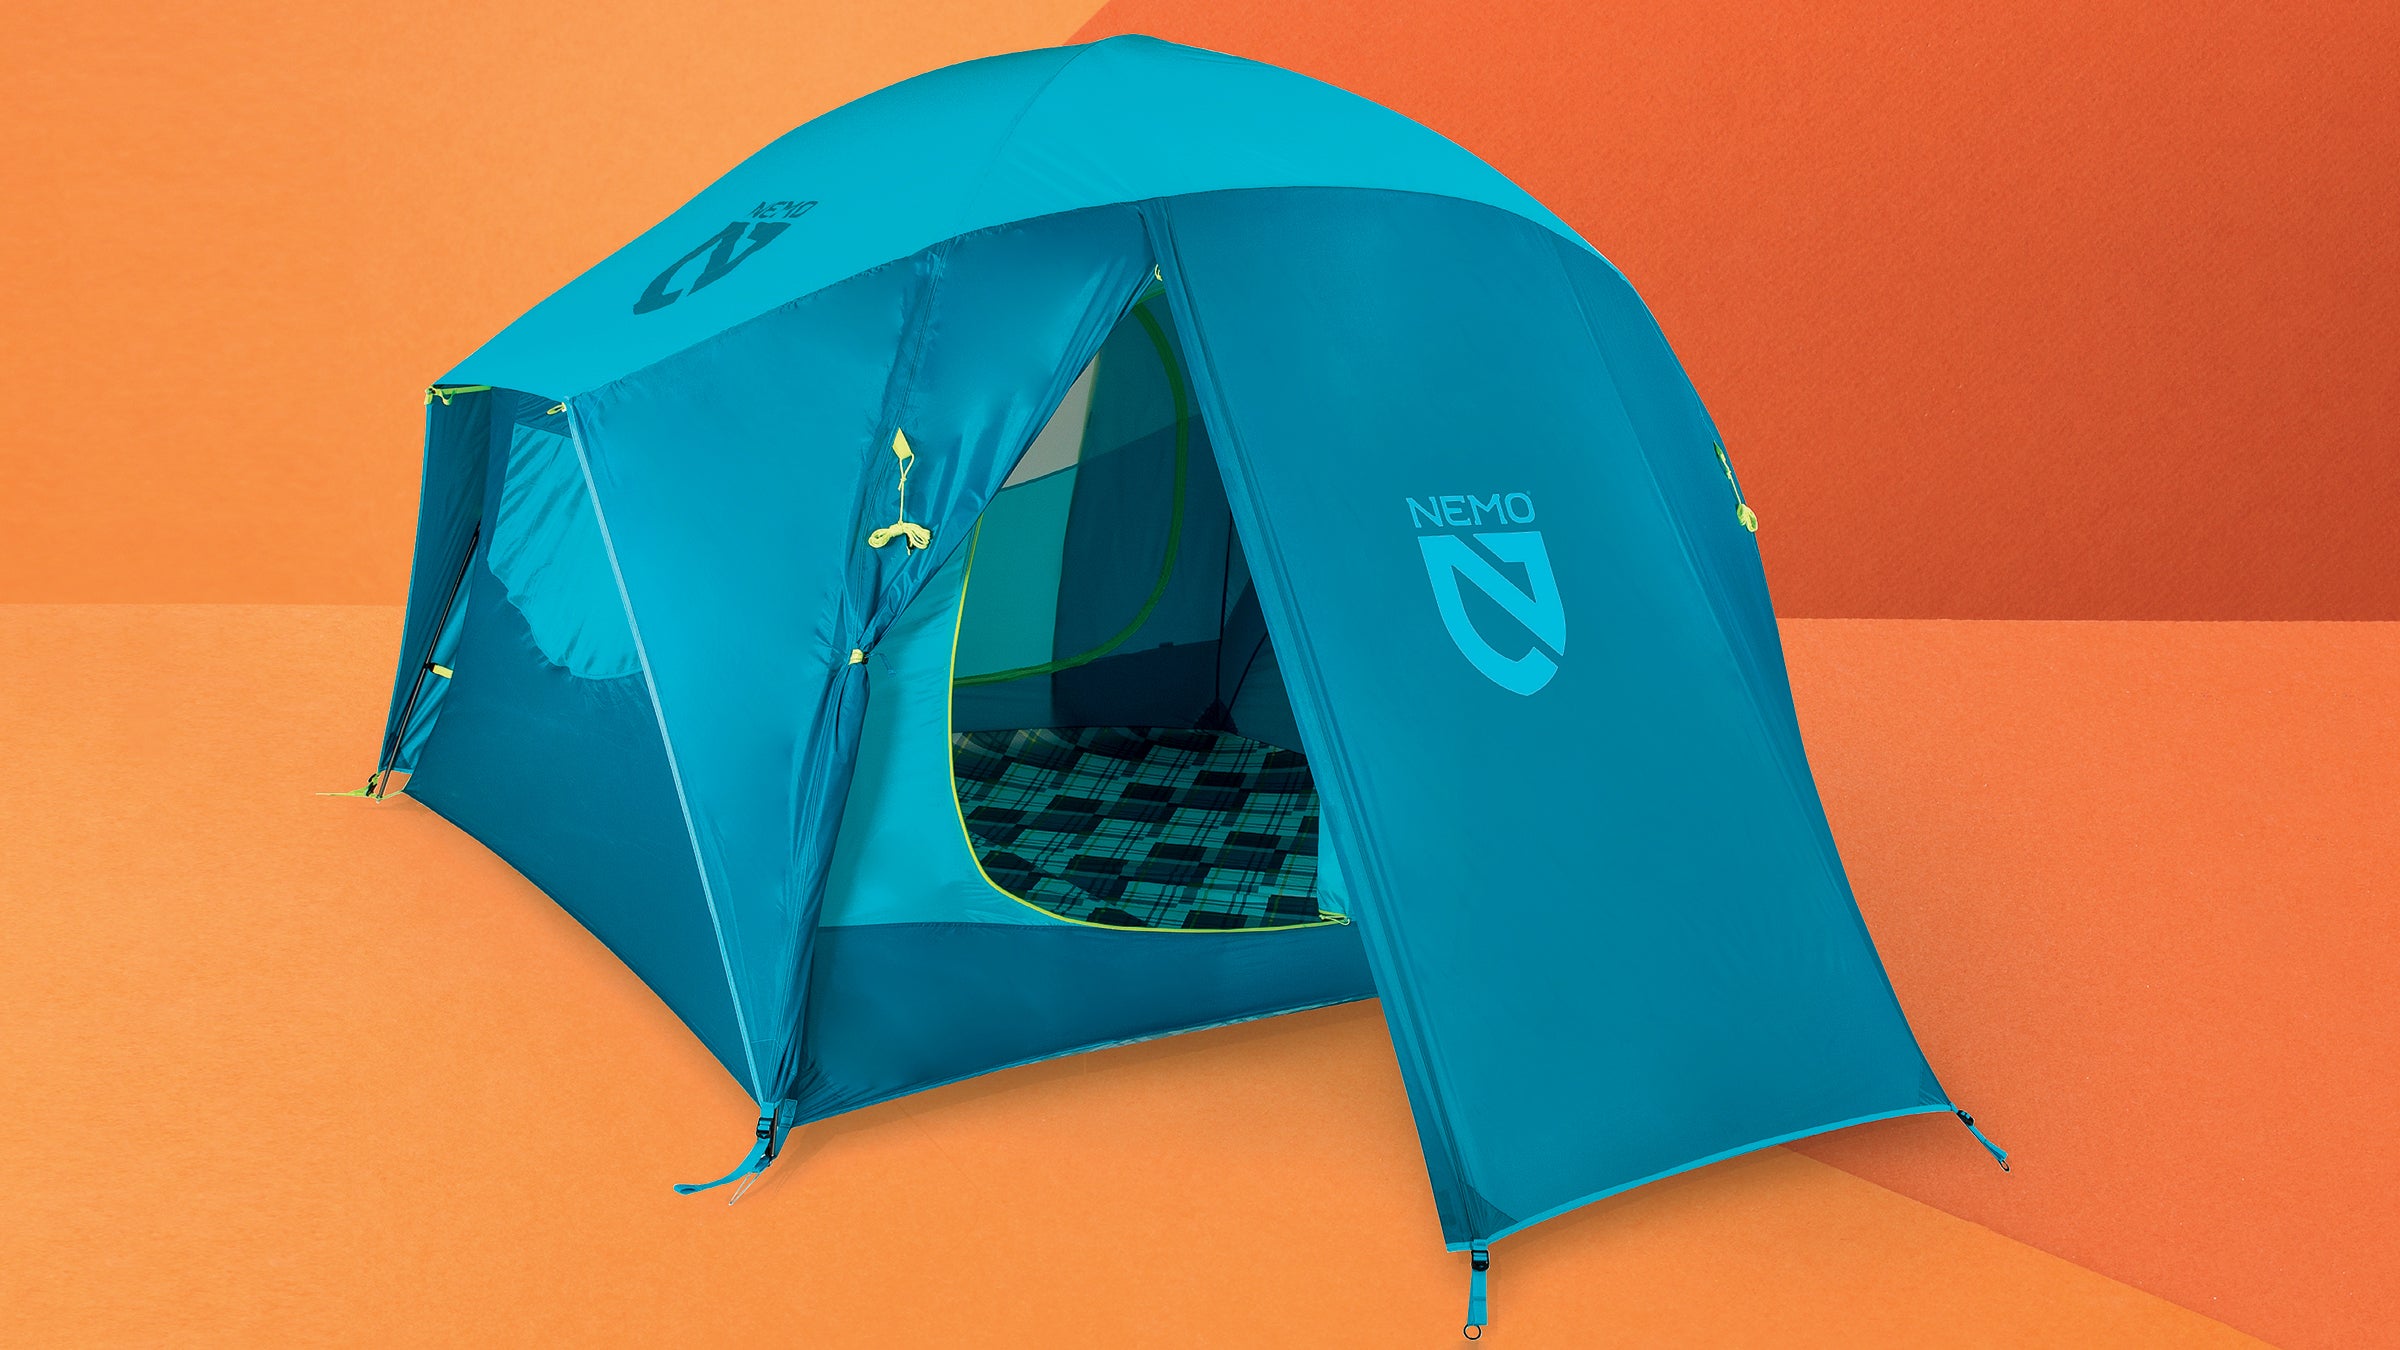 Nemo Announces New Car Camping Gear for 2022 - Tennessee Valley